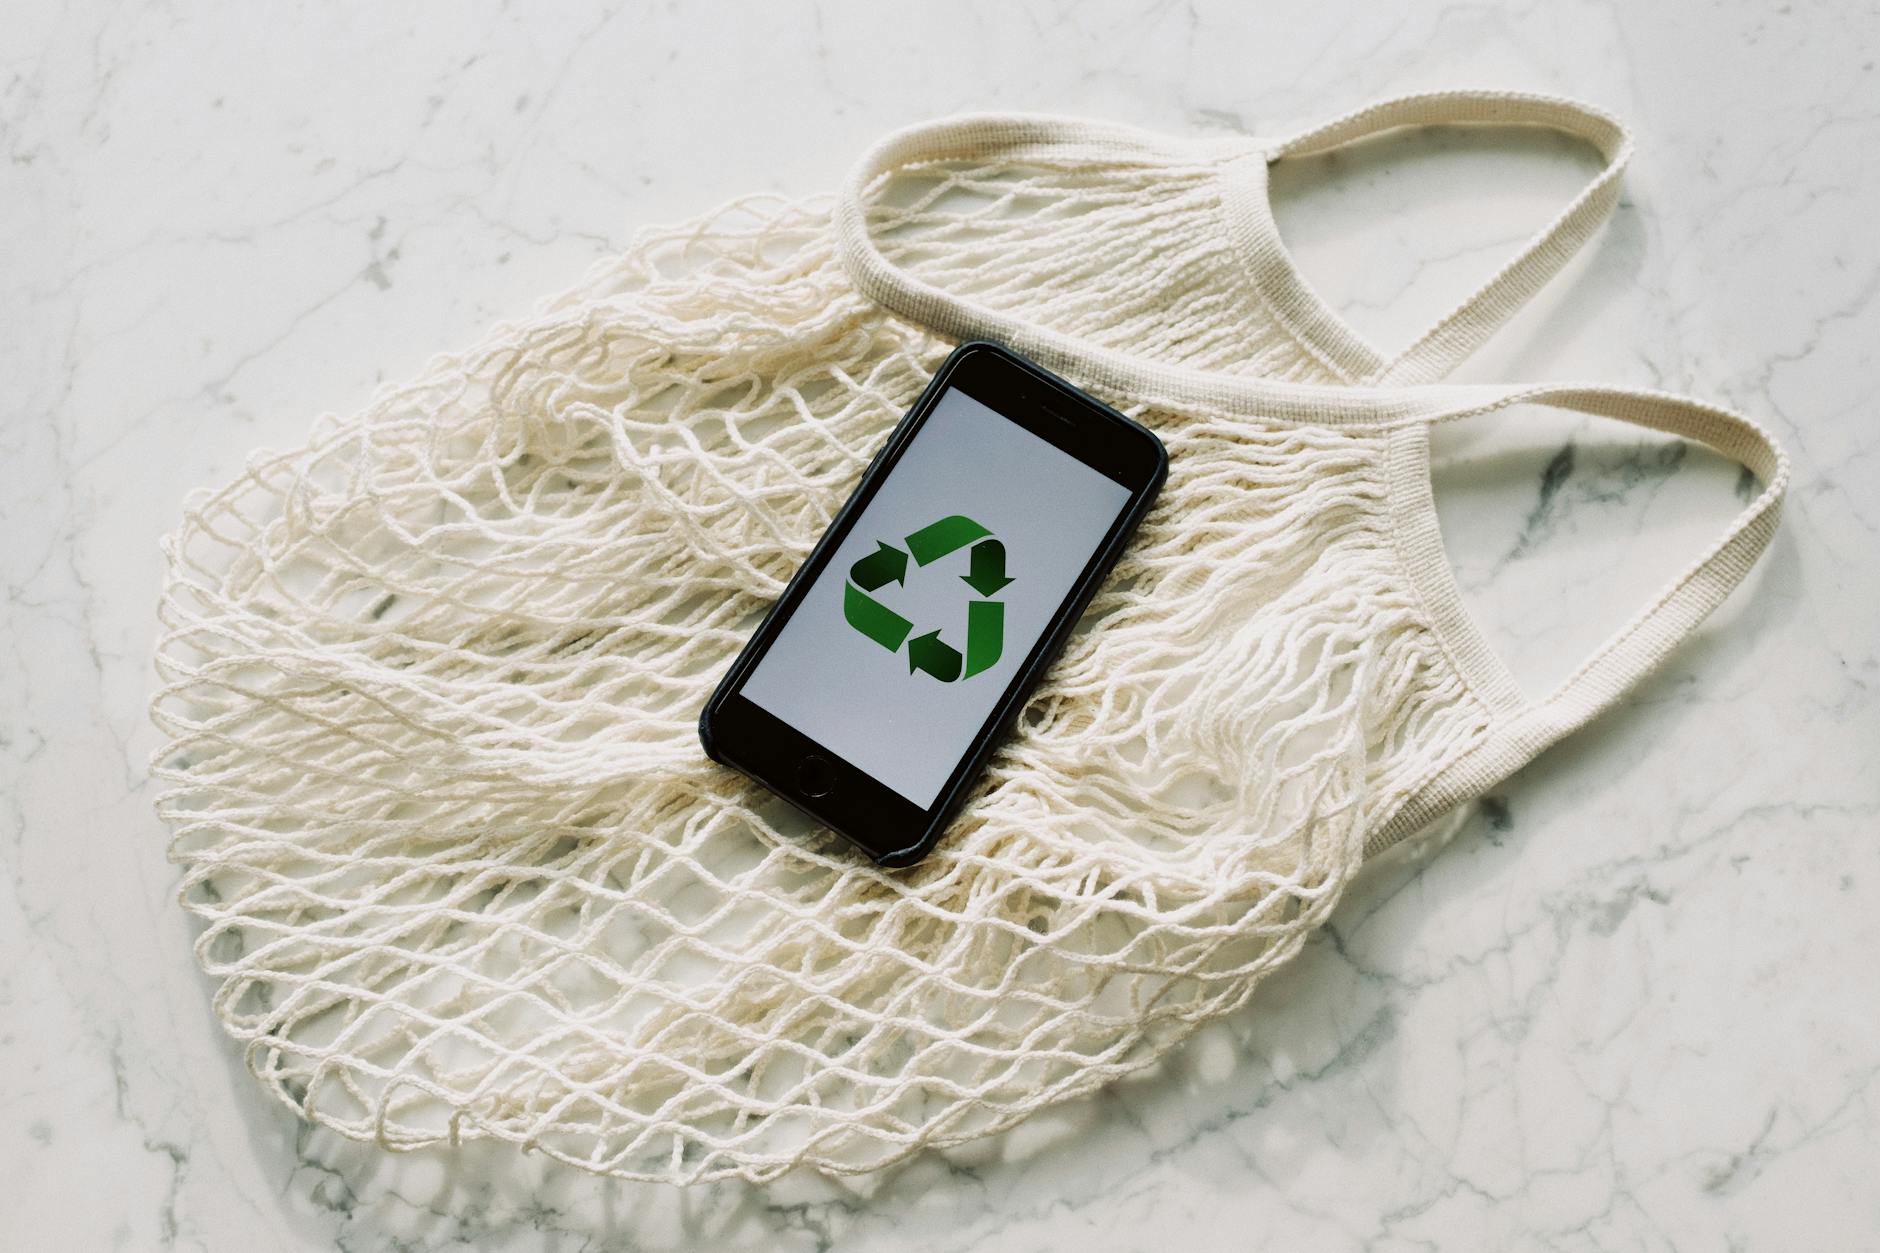 A reusable bag with a phone that shows a recycle sign on it